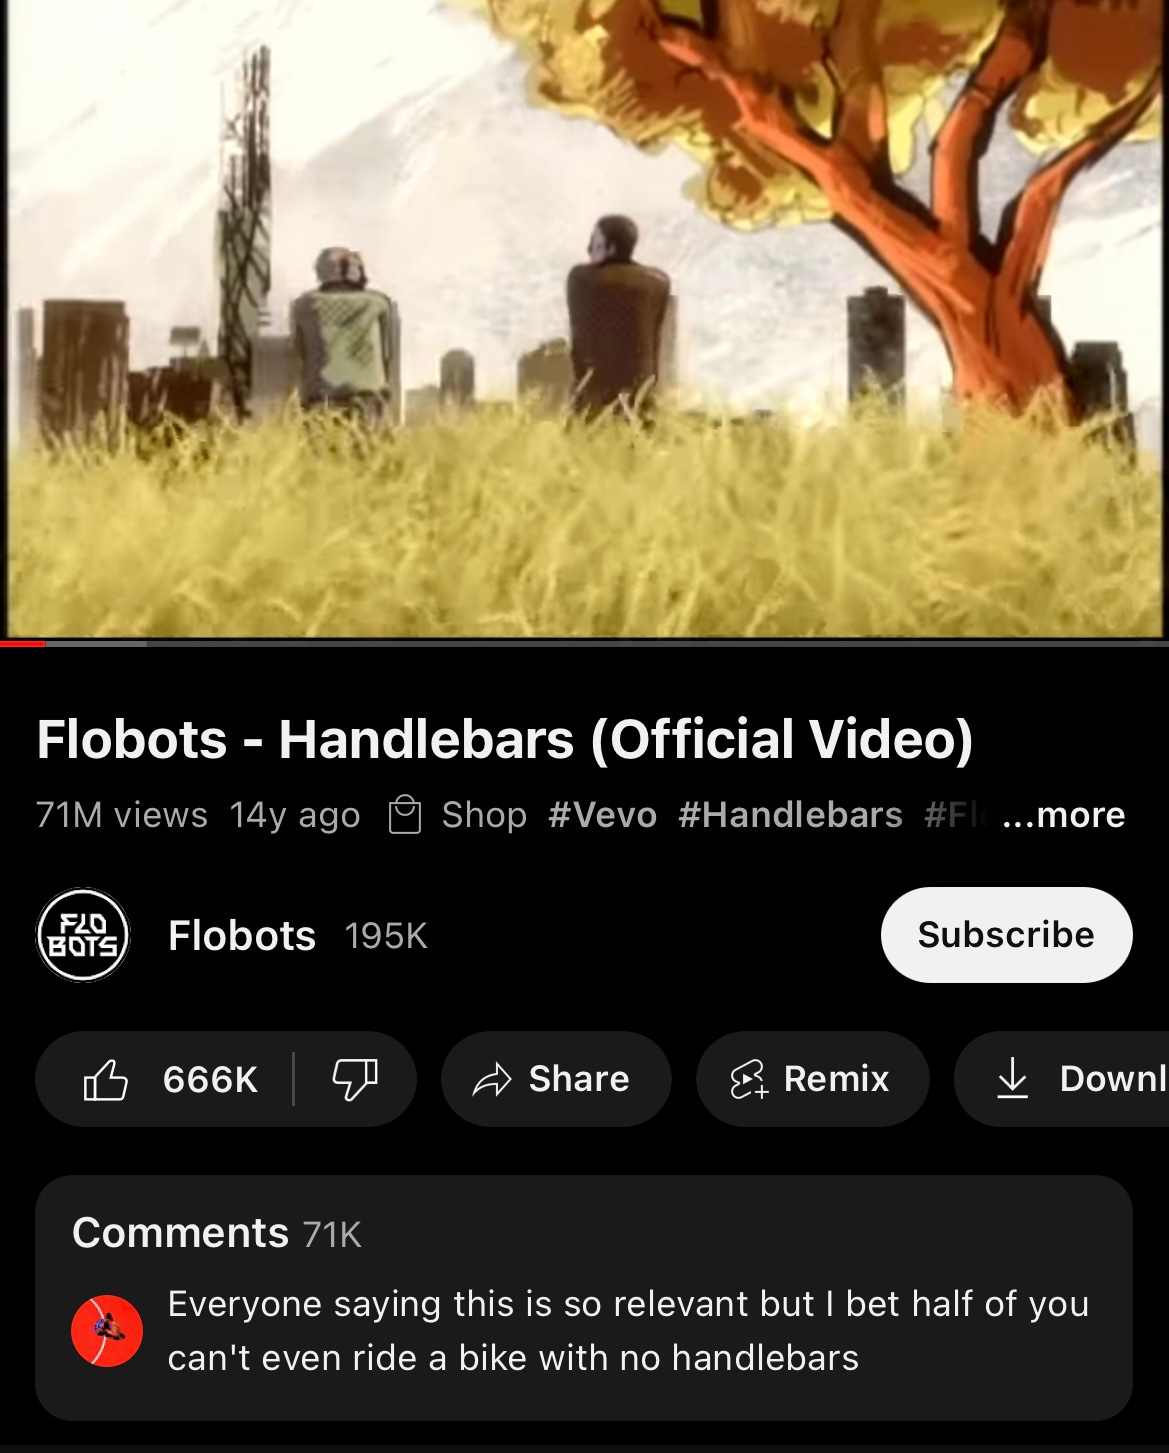 Screenshot of music video for "Handlebars" on Youtube, which includes the comment "Everyone saying this is so relevant but I bet half of you can't even ride a bike with no handlebars."